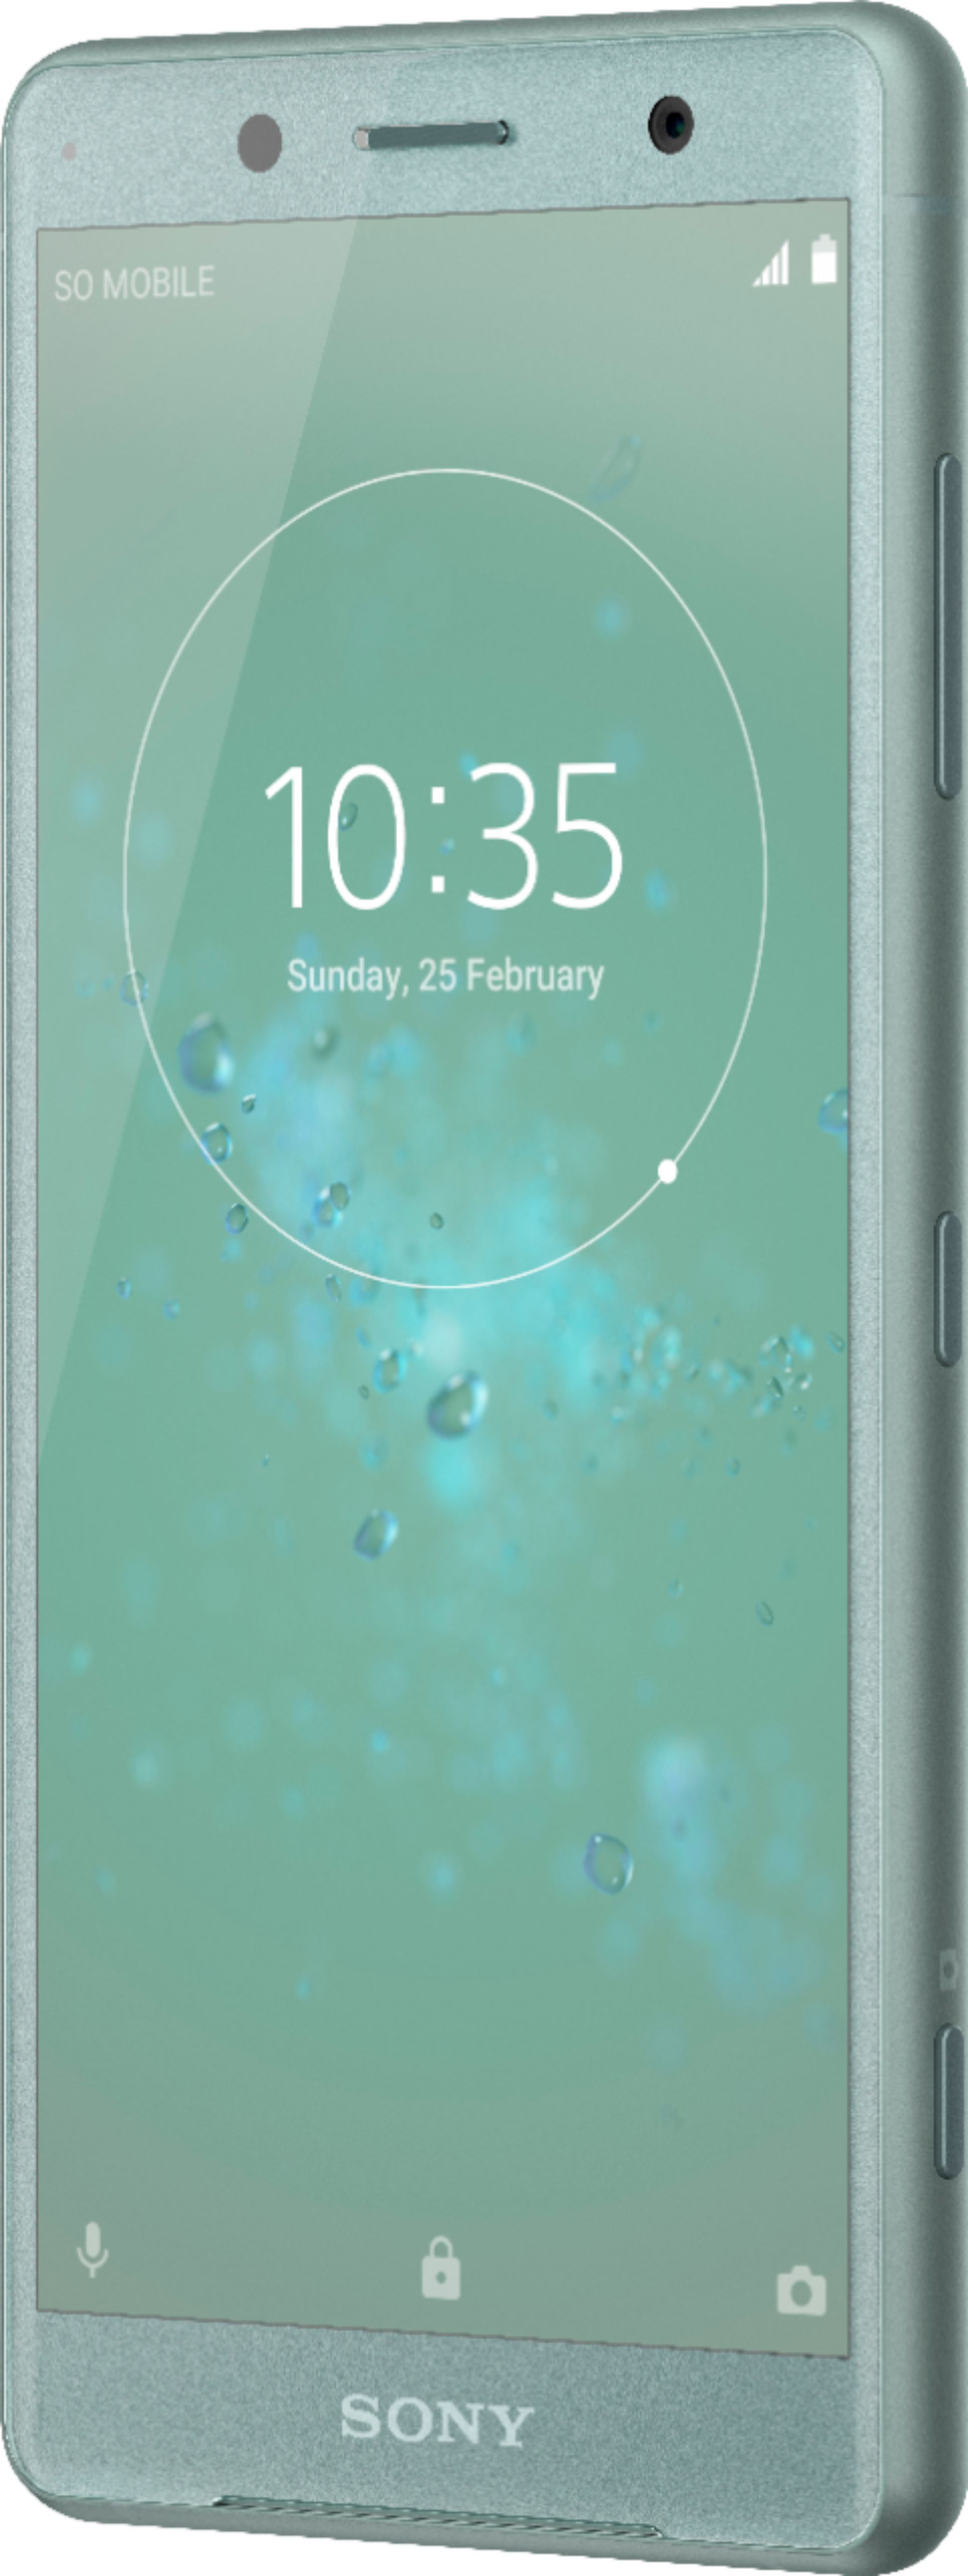 Sony Xperia Xz2 Compact With 64gb Memory Cell Phone Unlocked Moss Green H14 Best Buy